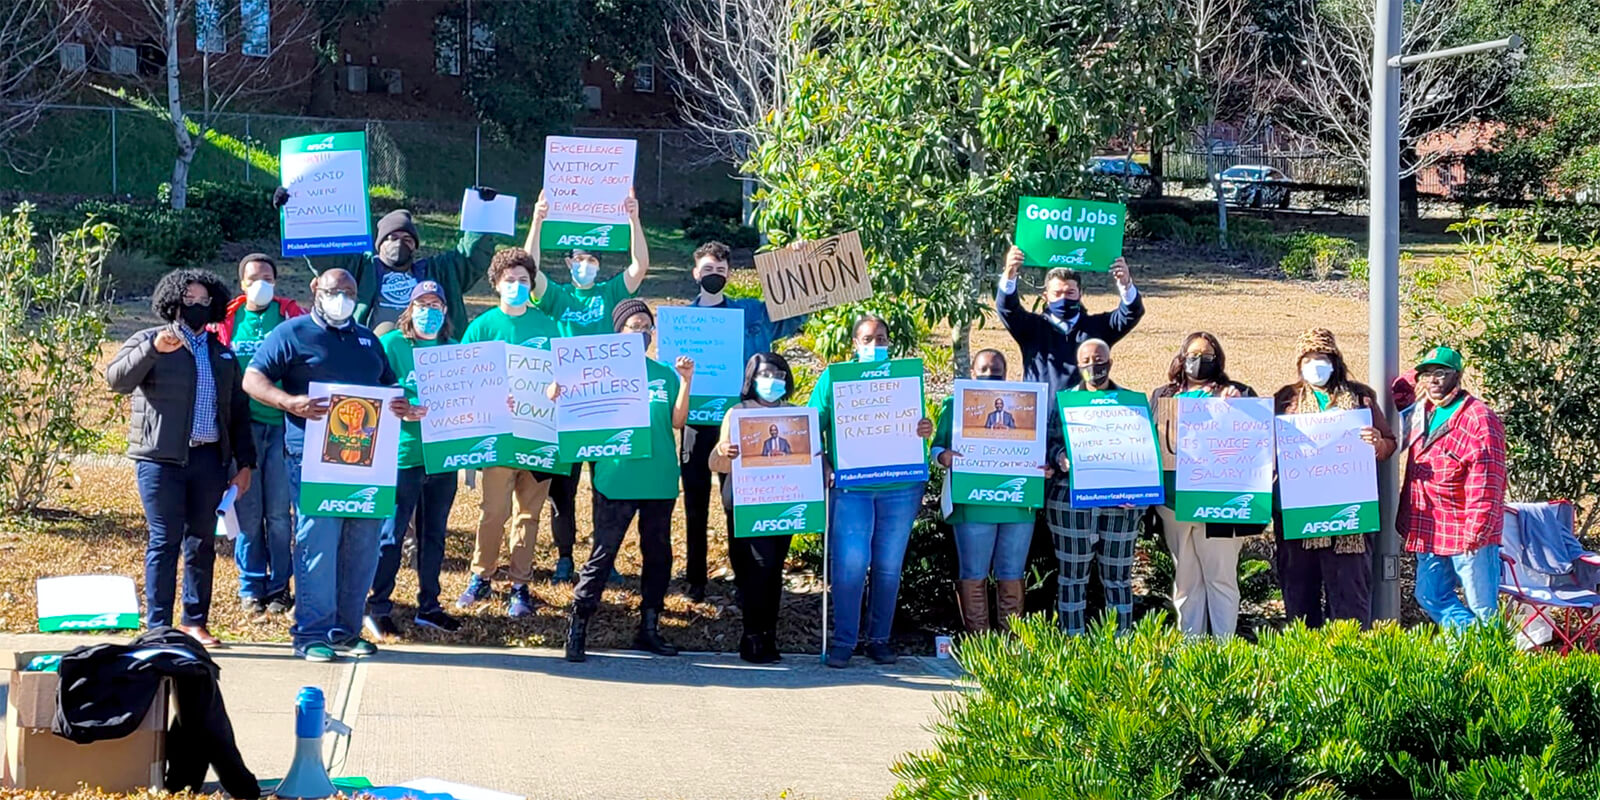 FAMU workers call attention to poverty-level wages